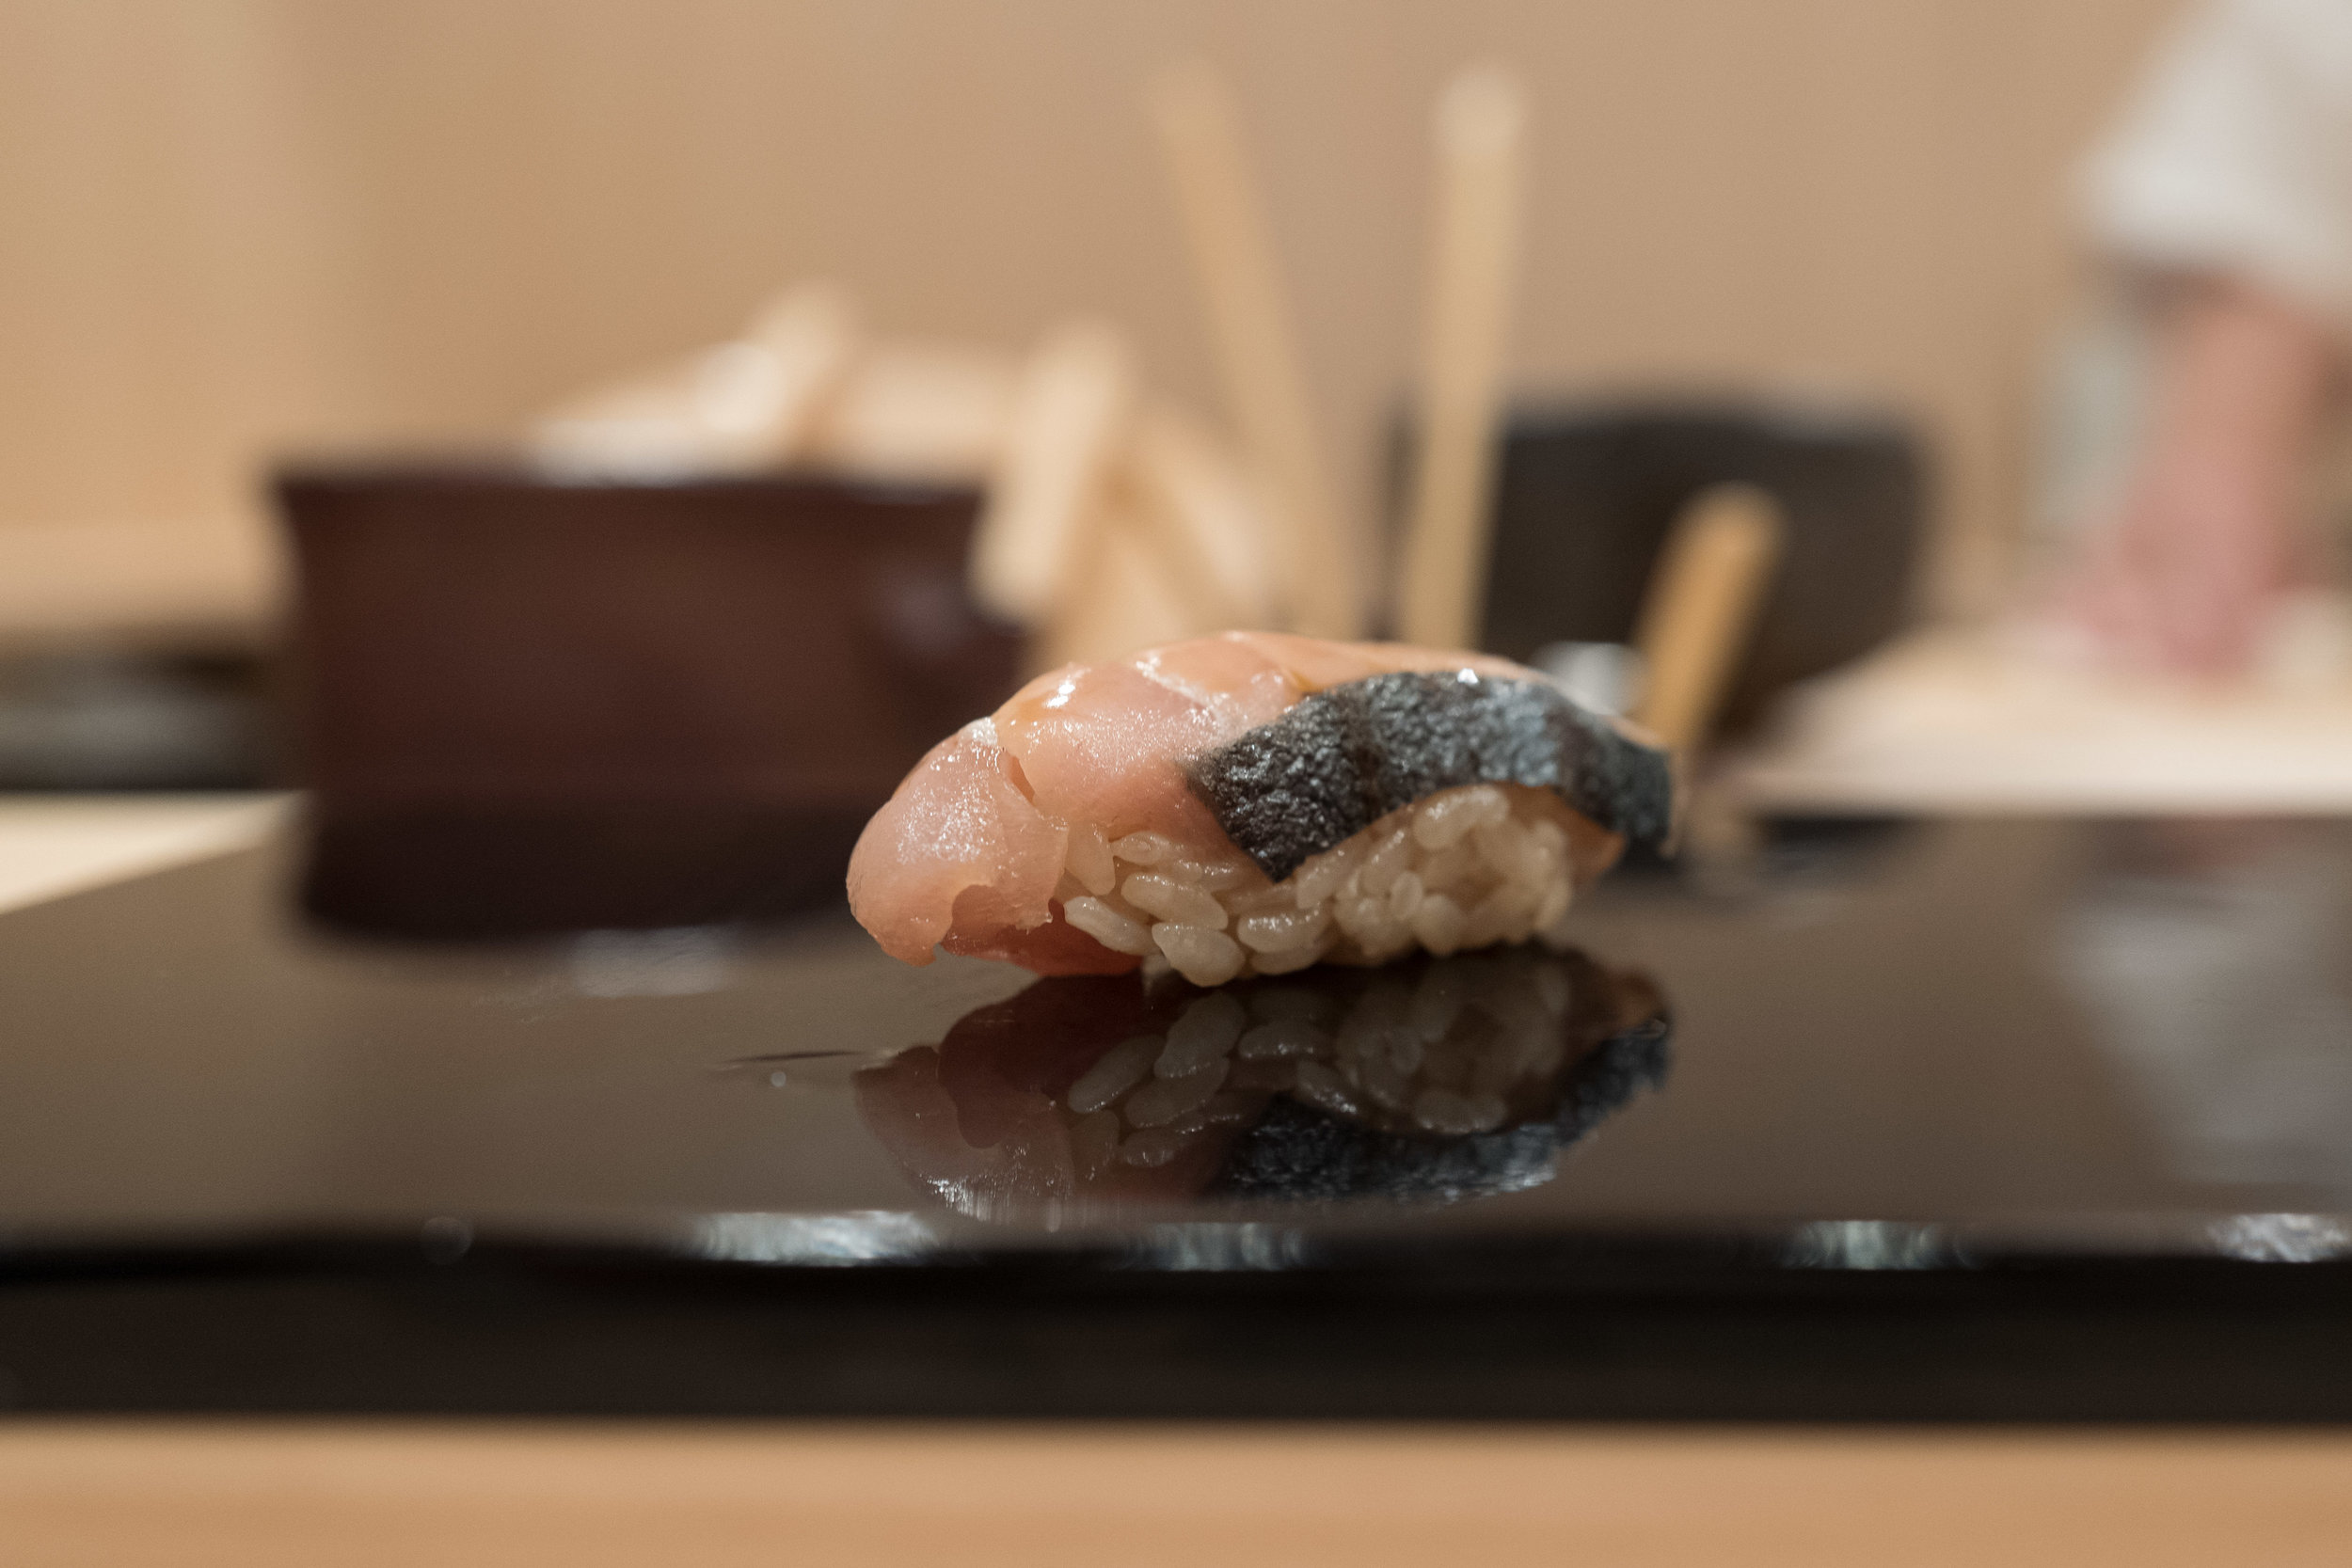  The sawara was one of the best I've ever tasted 